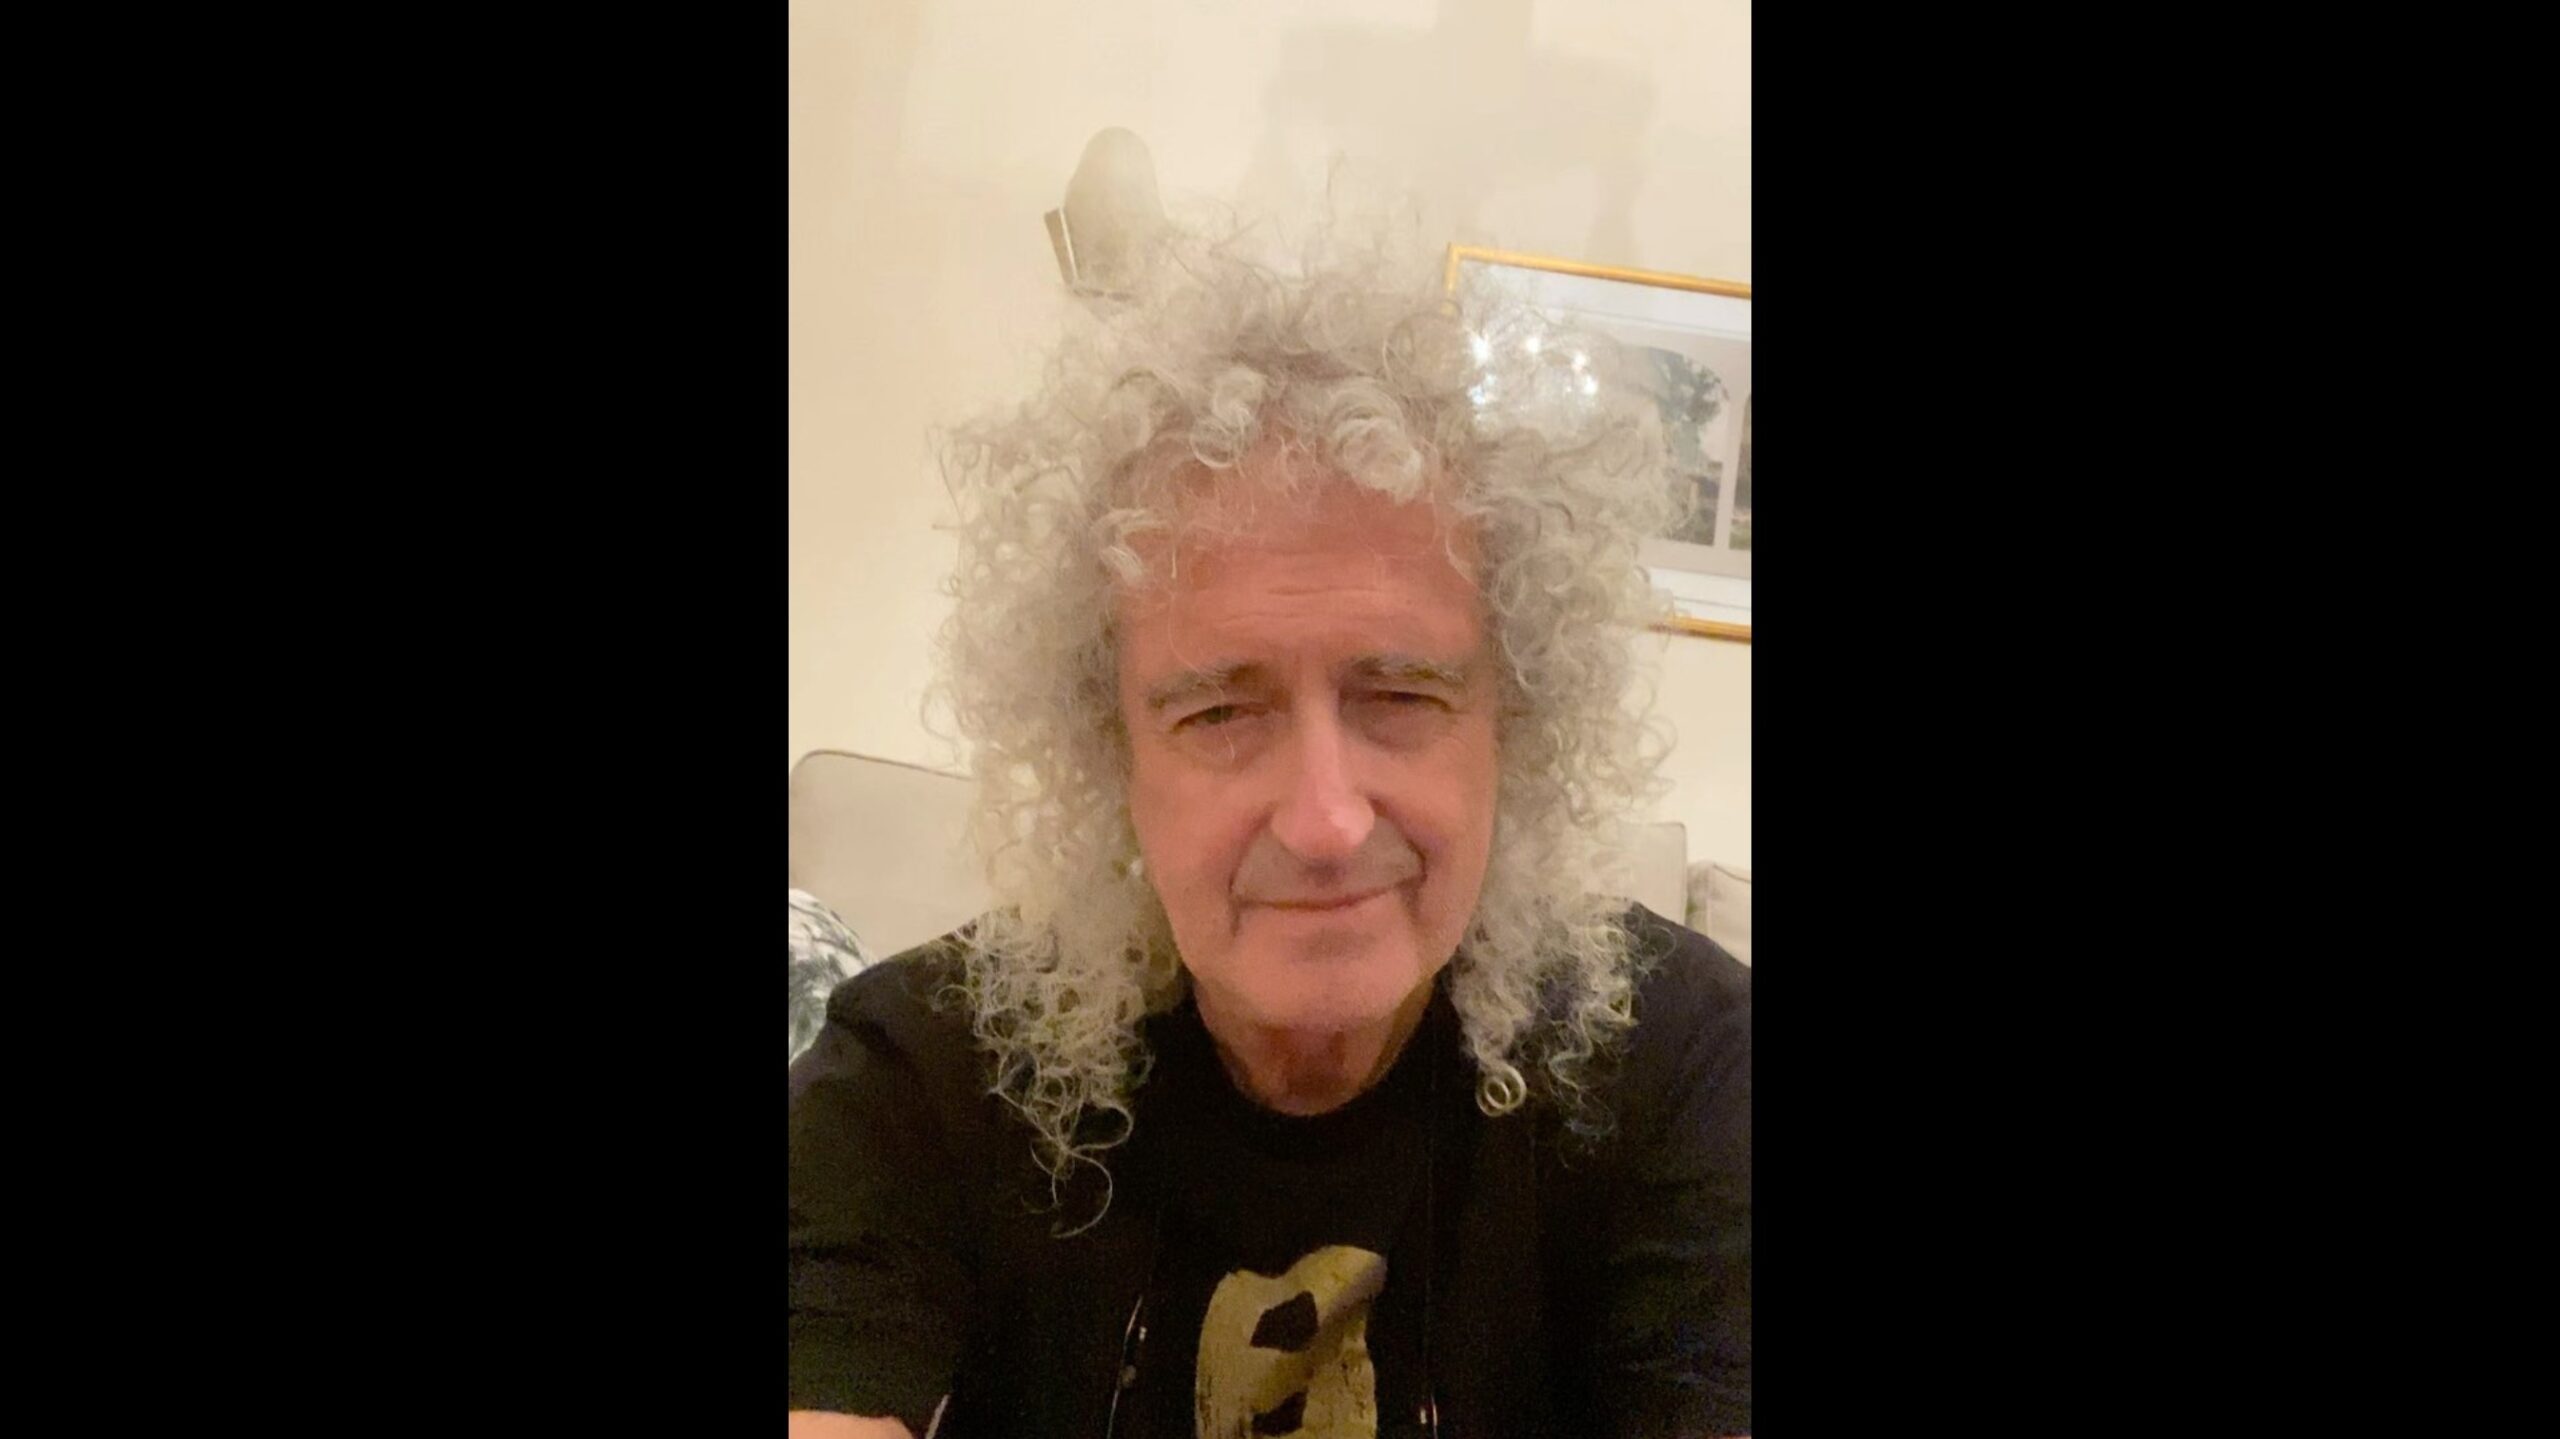 Brian May ‘touched by the torrent of love and support’ from fans after heart attack